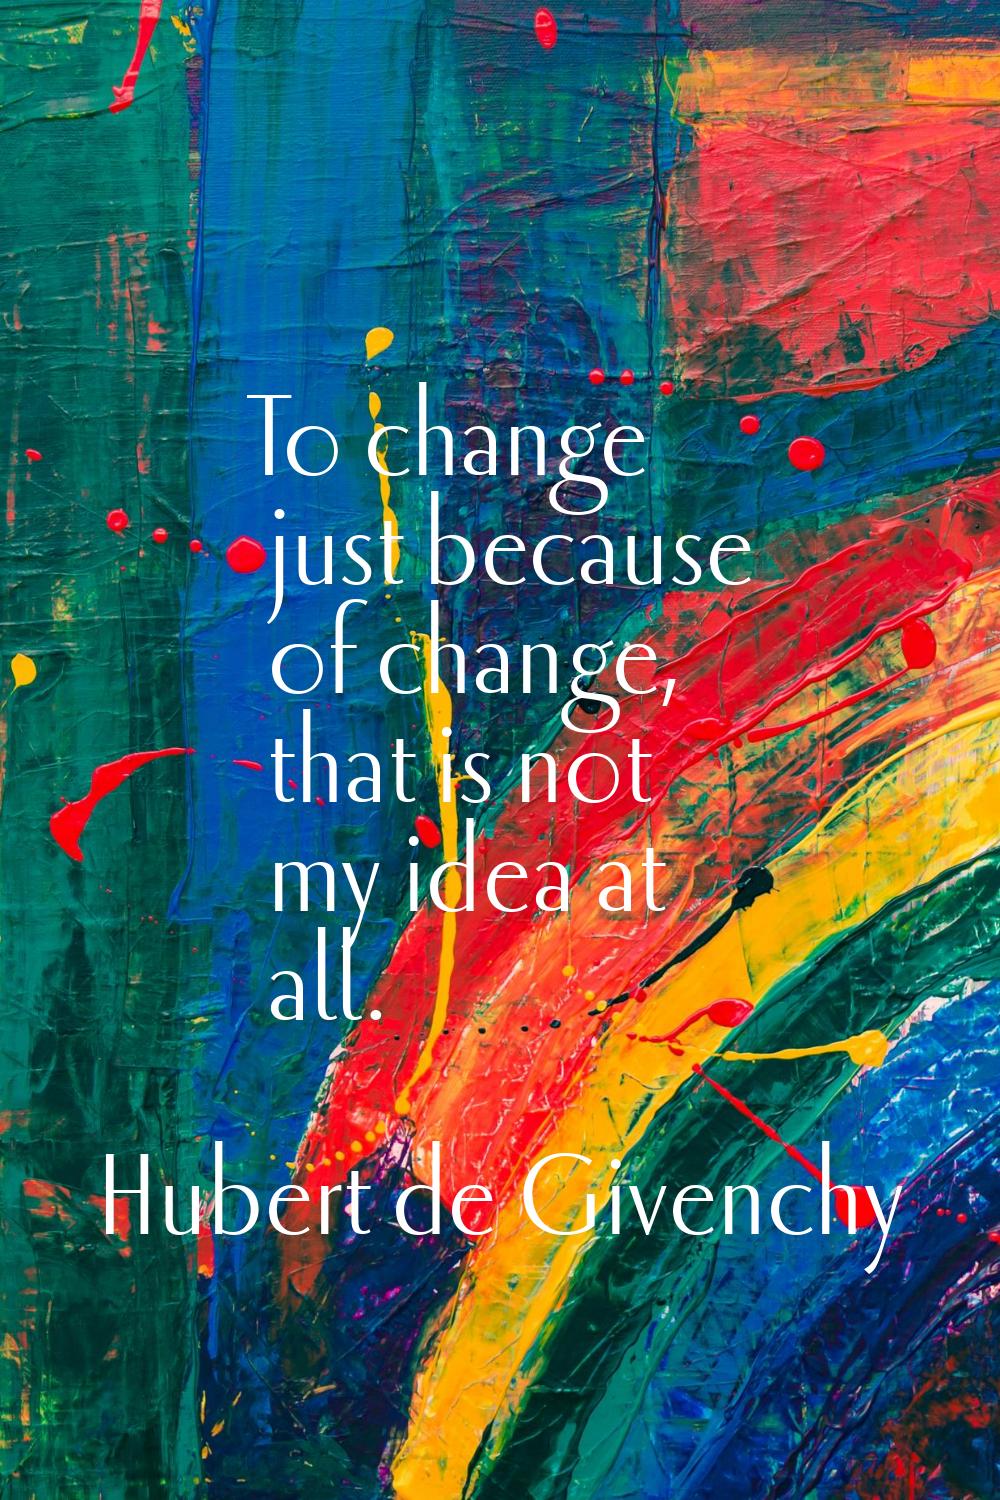 To change just because of change, that is not my idea at all.